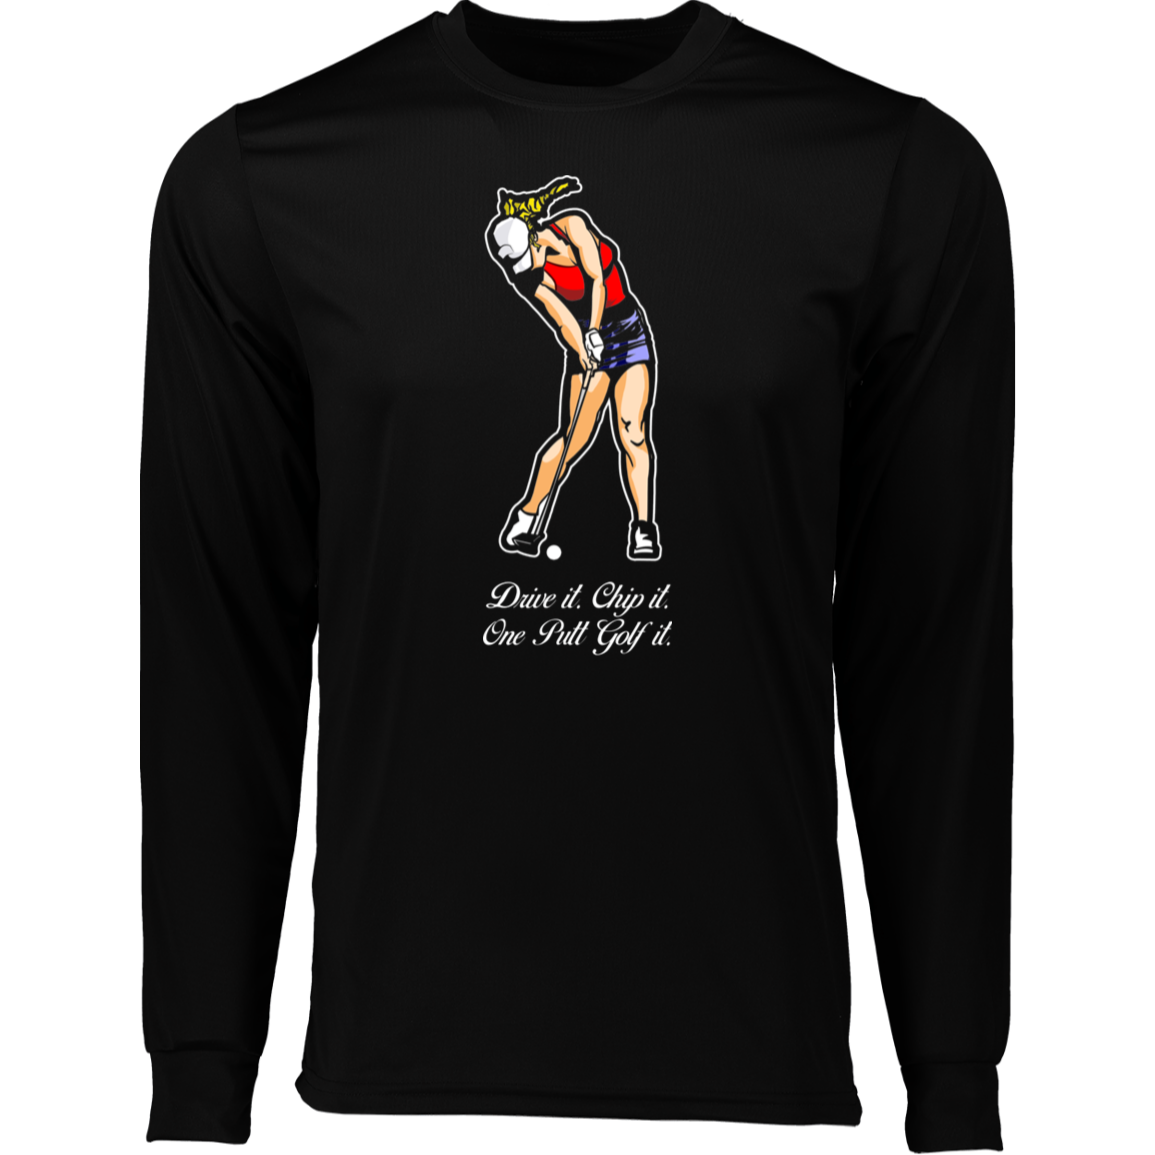 OPG Custom Design #9. Drive it. Chip it. One Putt Golf It. Golf So. Cal. 100% Polyester Moisture-Wicking Tee